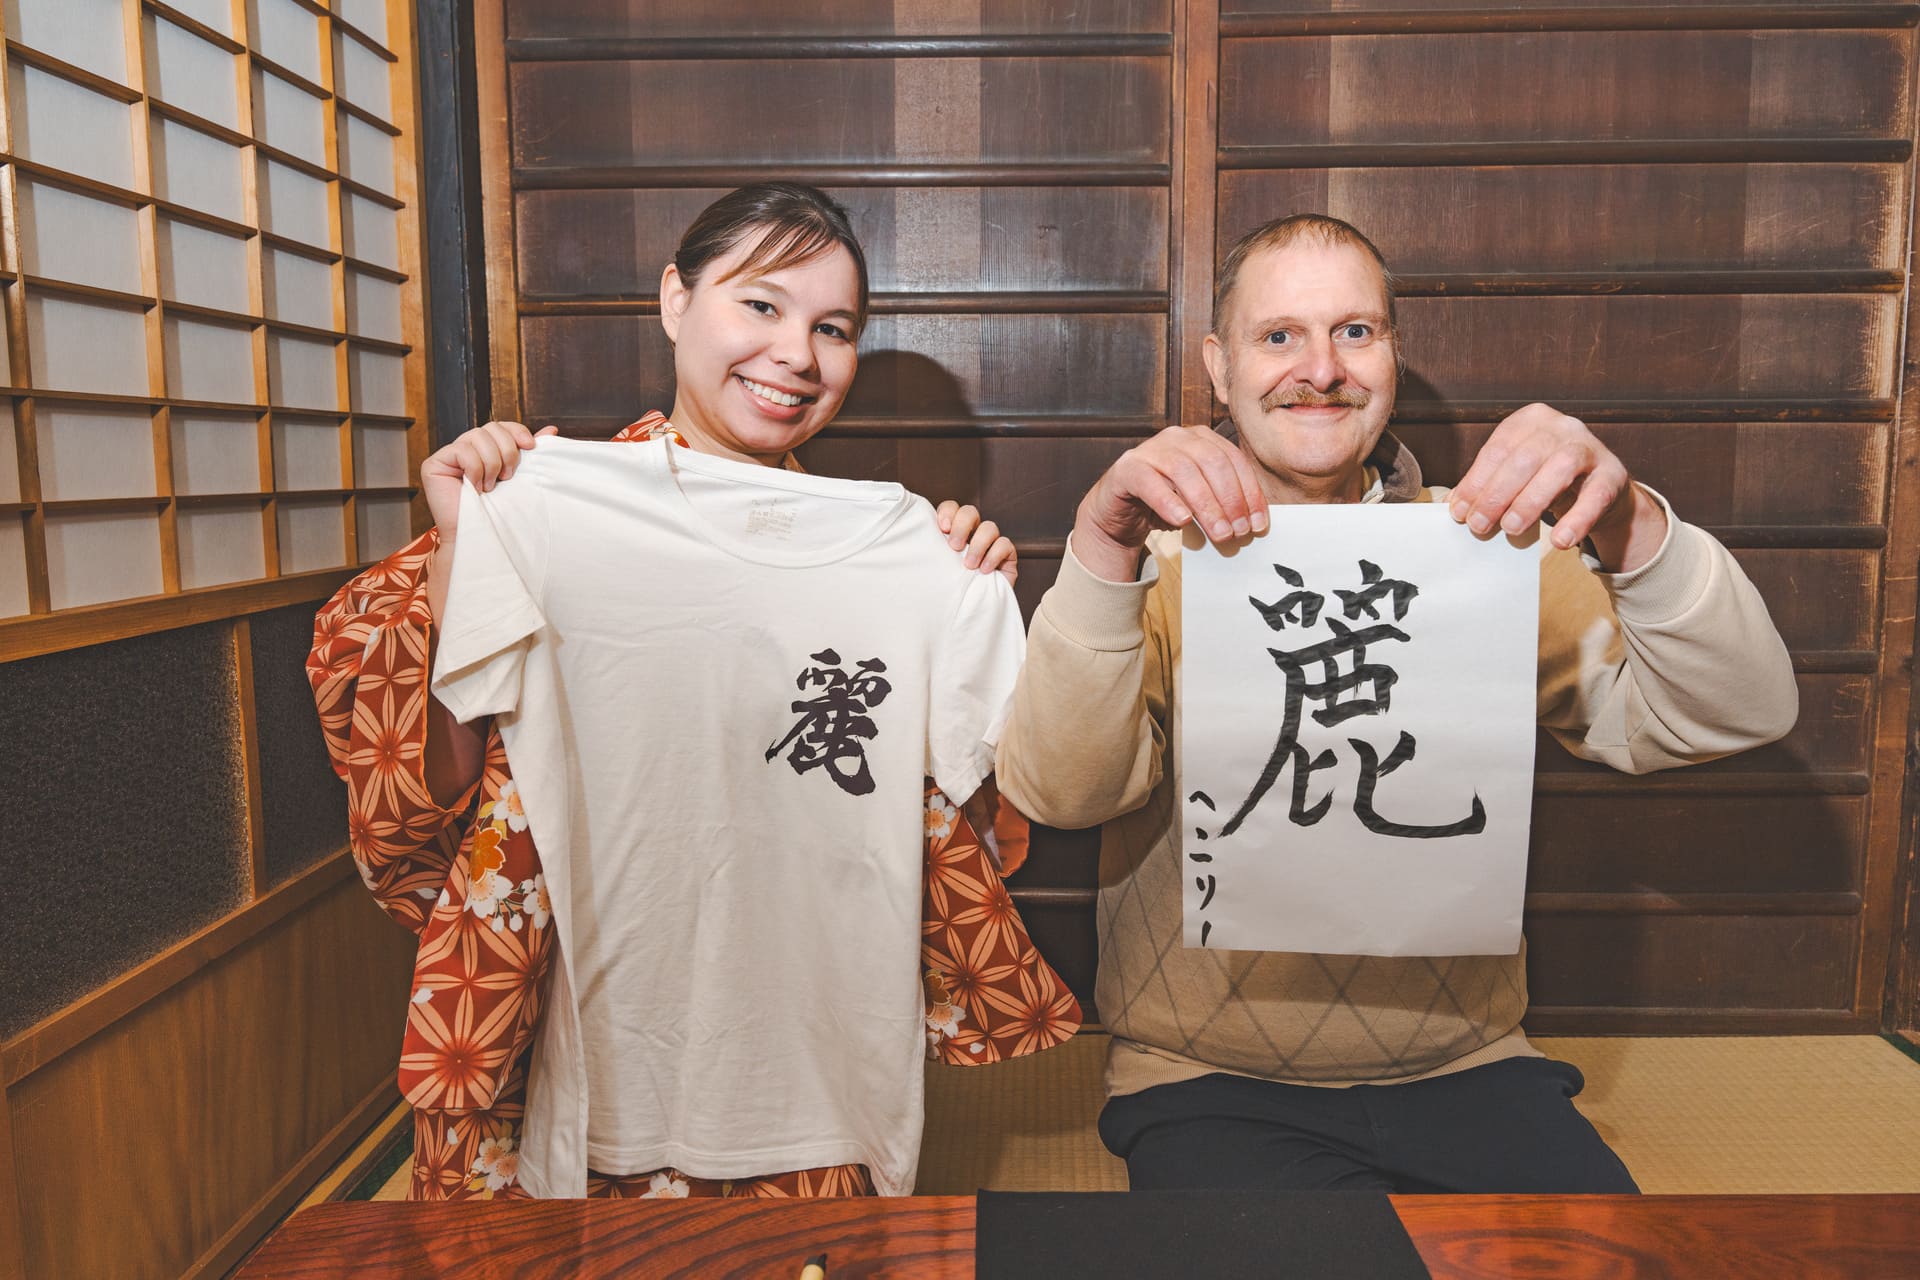 Japanese Cultural Experiences at Kyoto Abeya. A smiling man and woman each holding a T-shirt and calligraphy work with the character '愛'. Traditional Japanese room with wooden walls and shoji screens in the background.